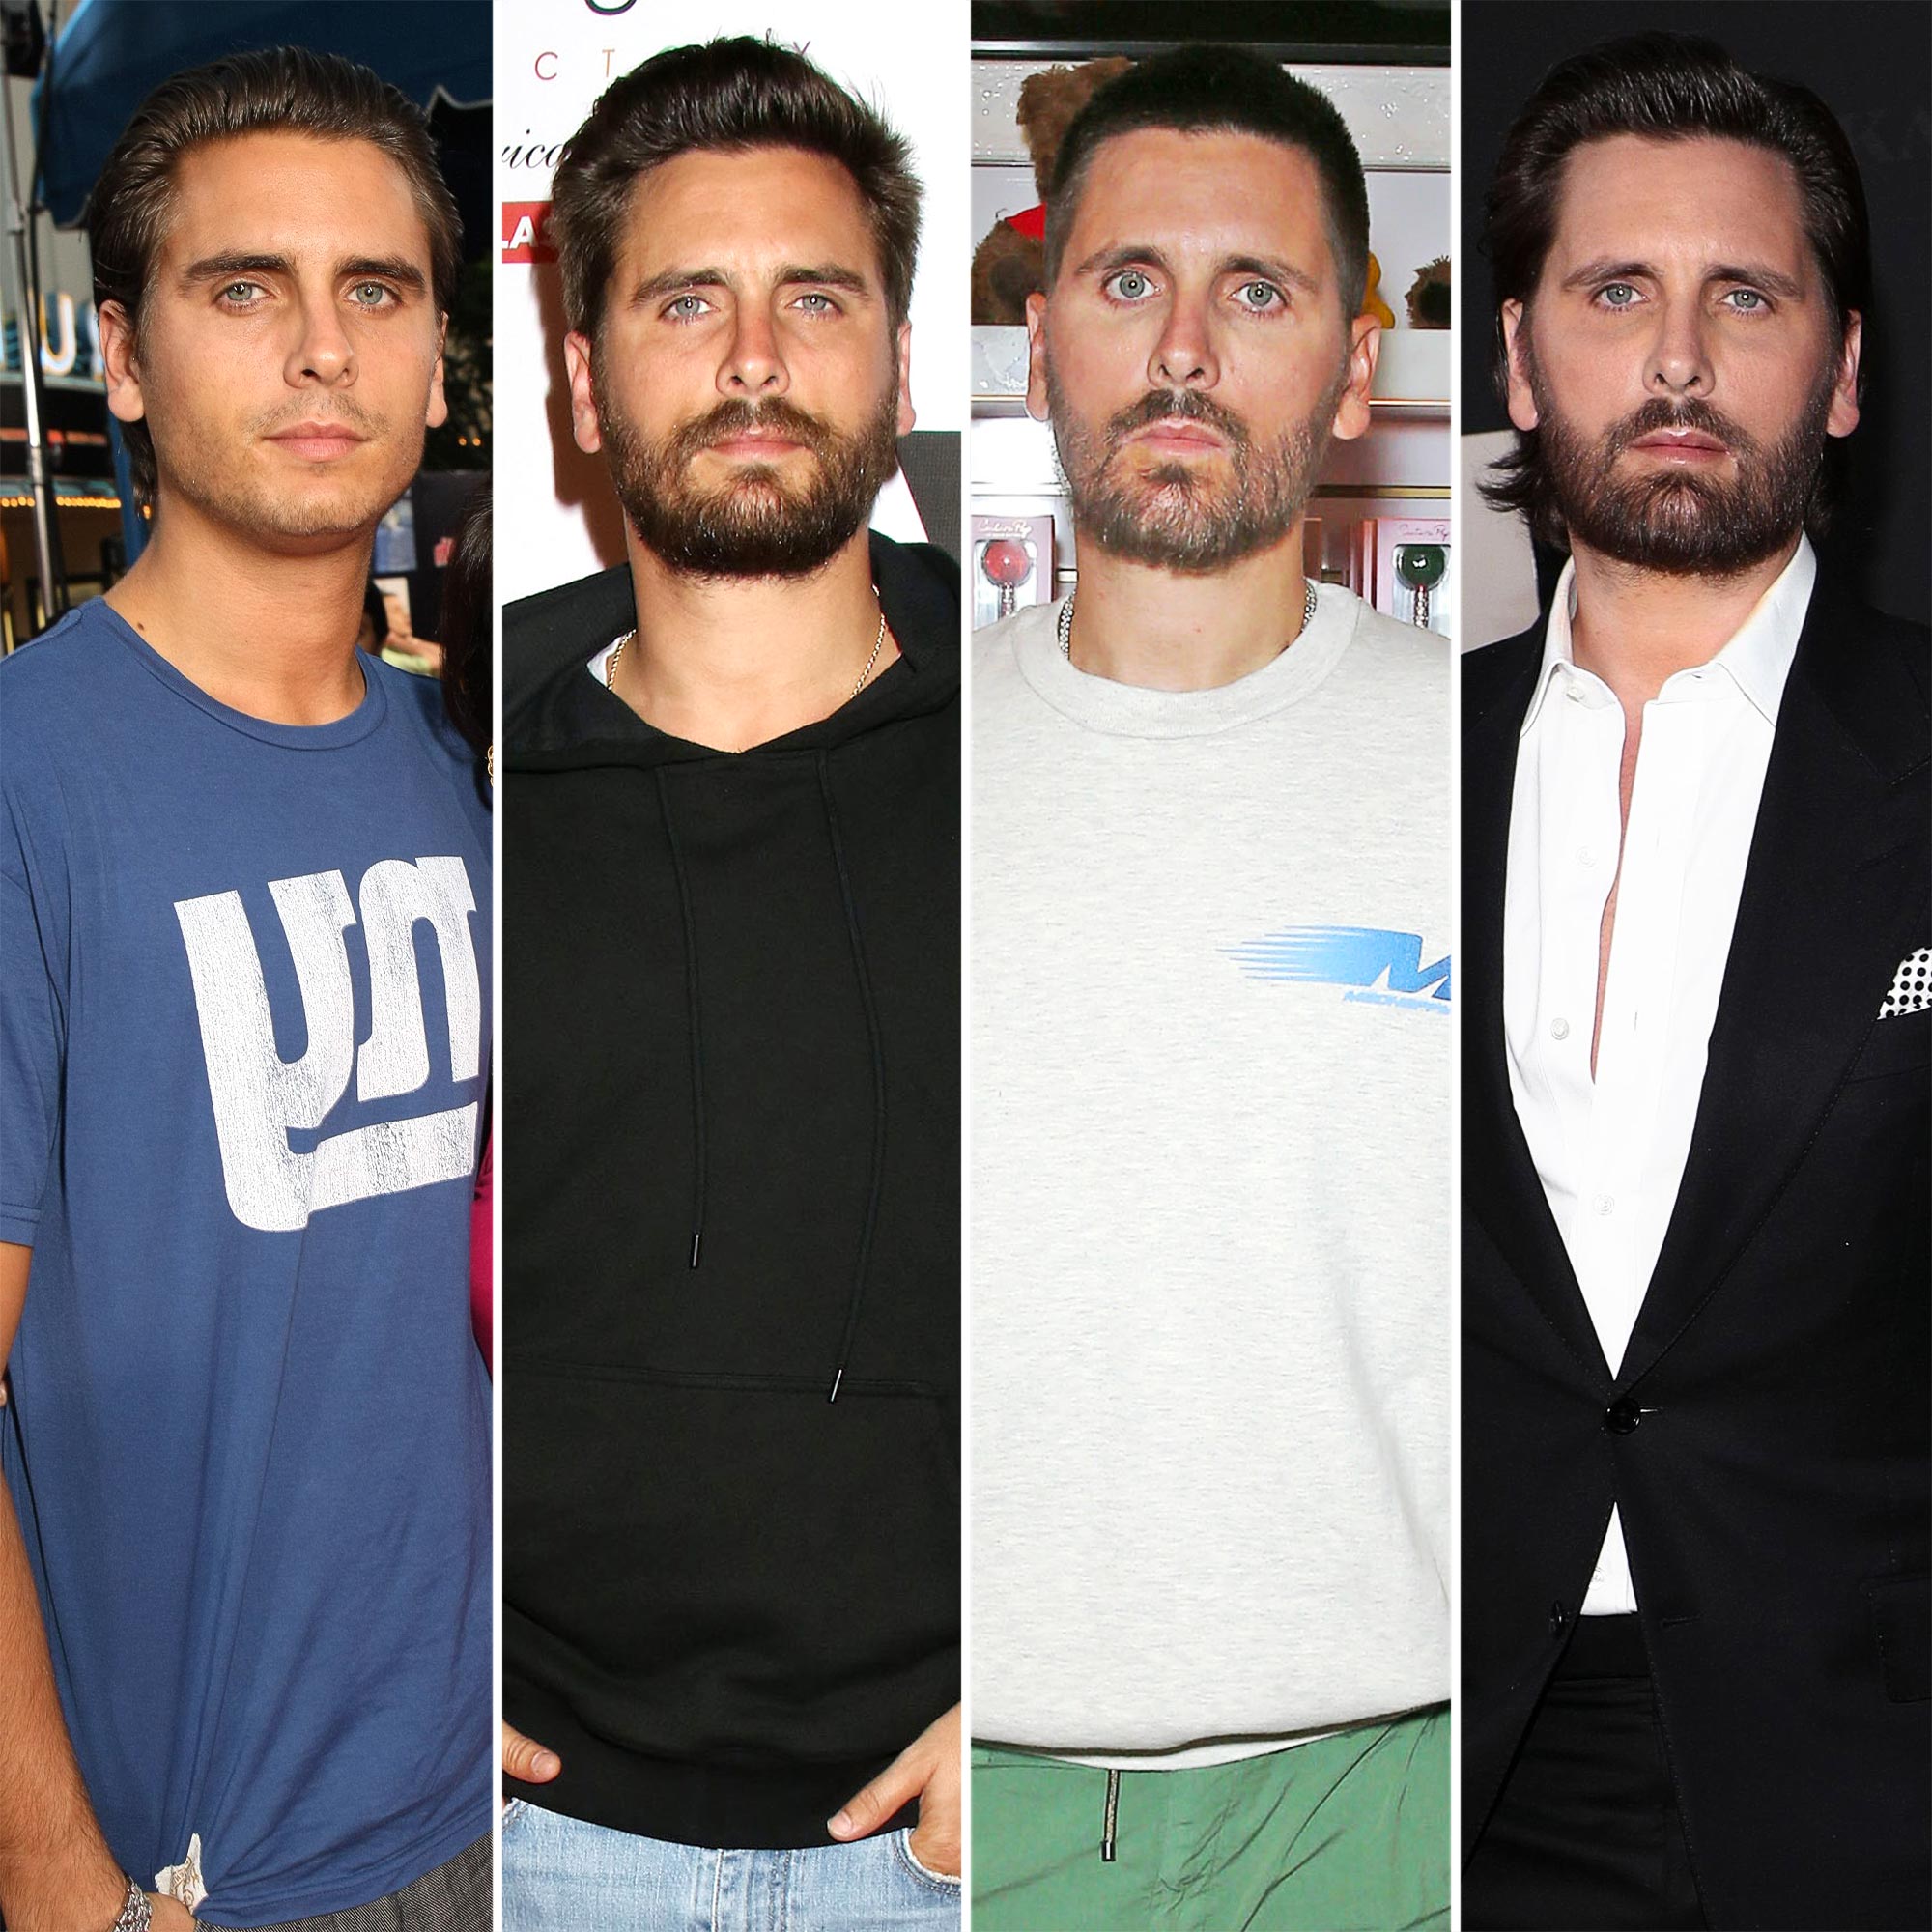 Scott Disick launches into profanity-filled rant at female fans in hotel  lobby | news.com.au — Australia's leading news site